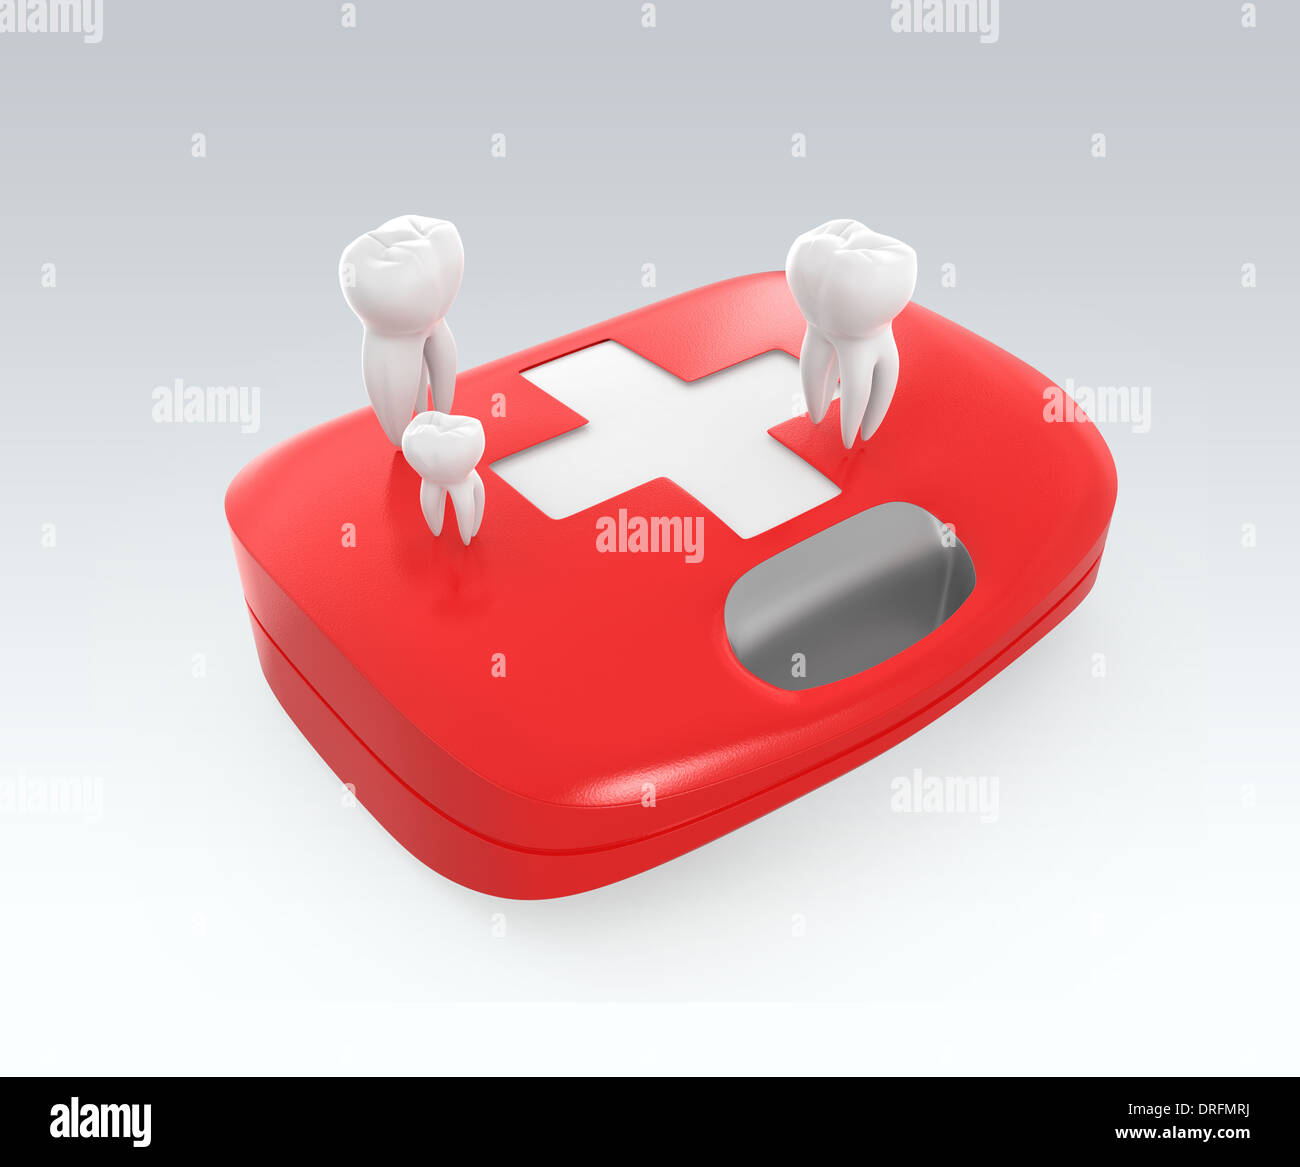 Teeth and first aid kit for dental emergency care service concept. Clipping path included. Stock Photo